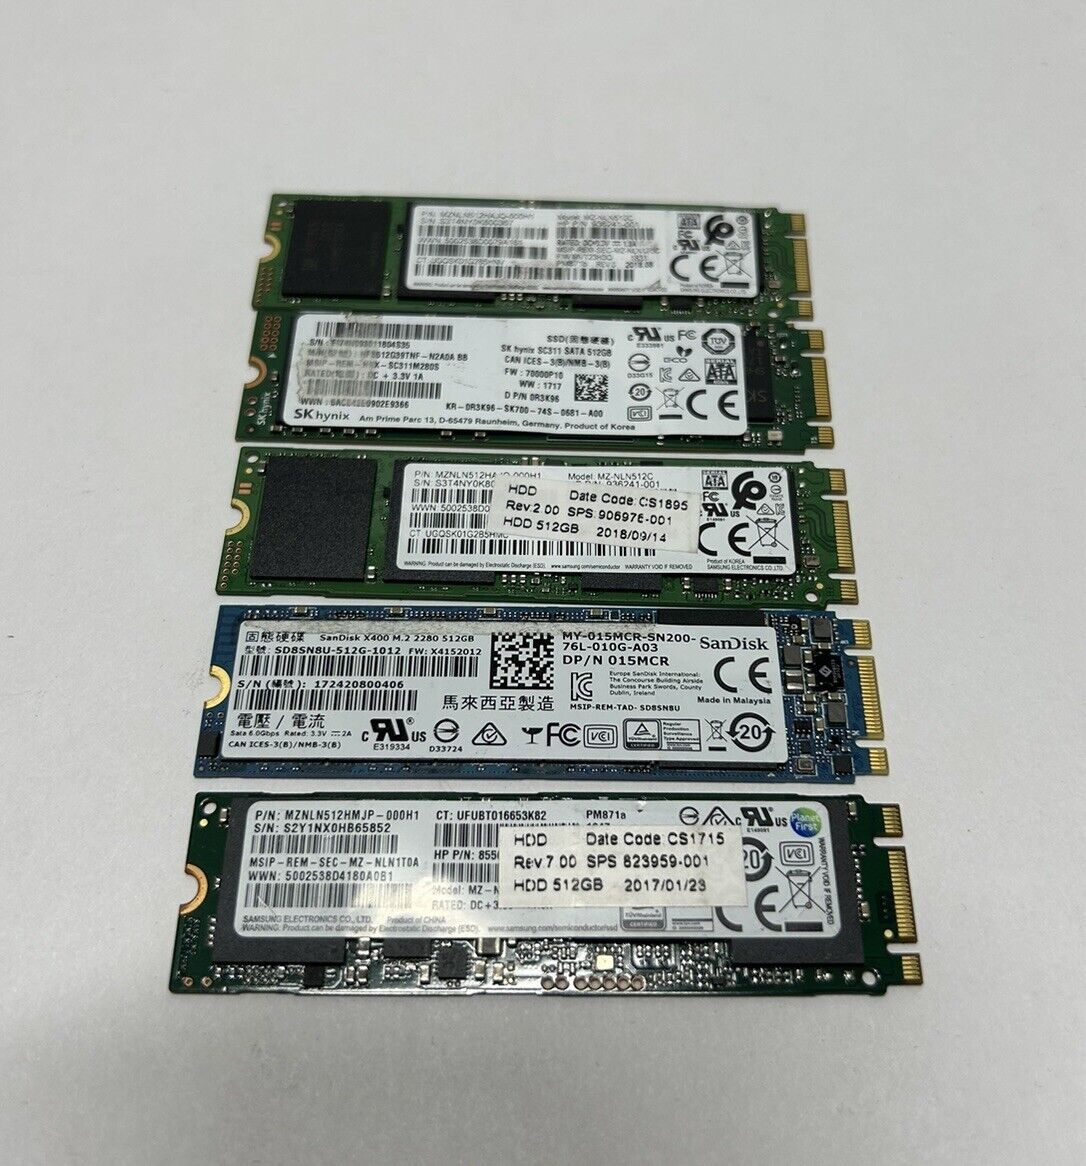 Lot of 5 Mixed Major Brands 512GB M.2 SATA 80mm Solid State Drive - Tested